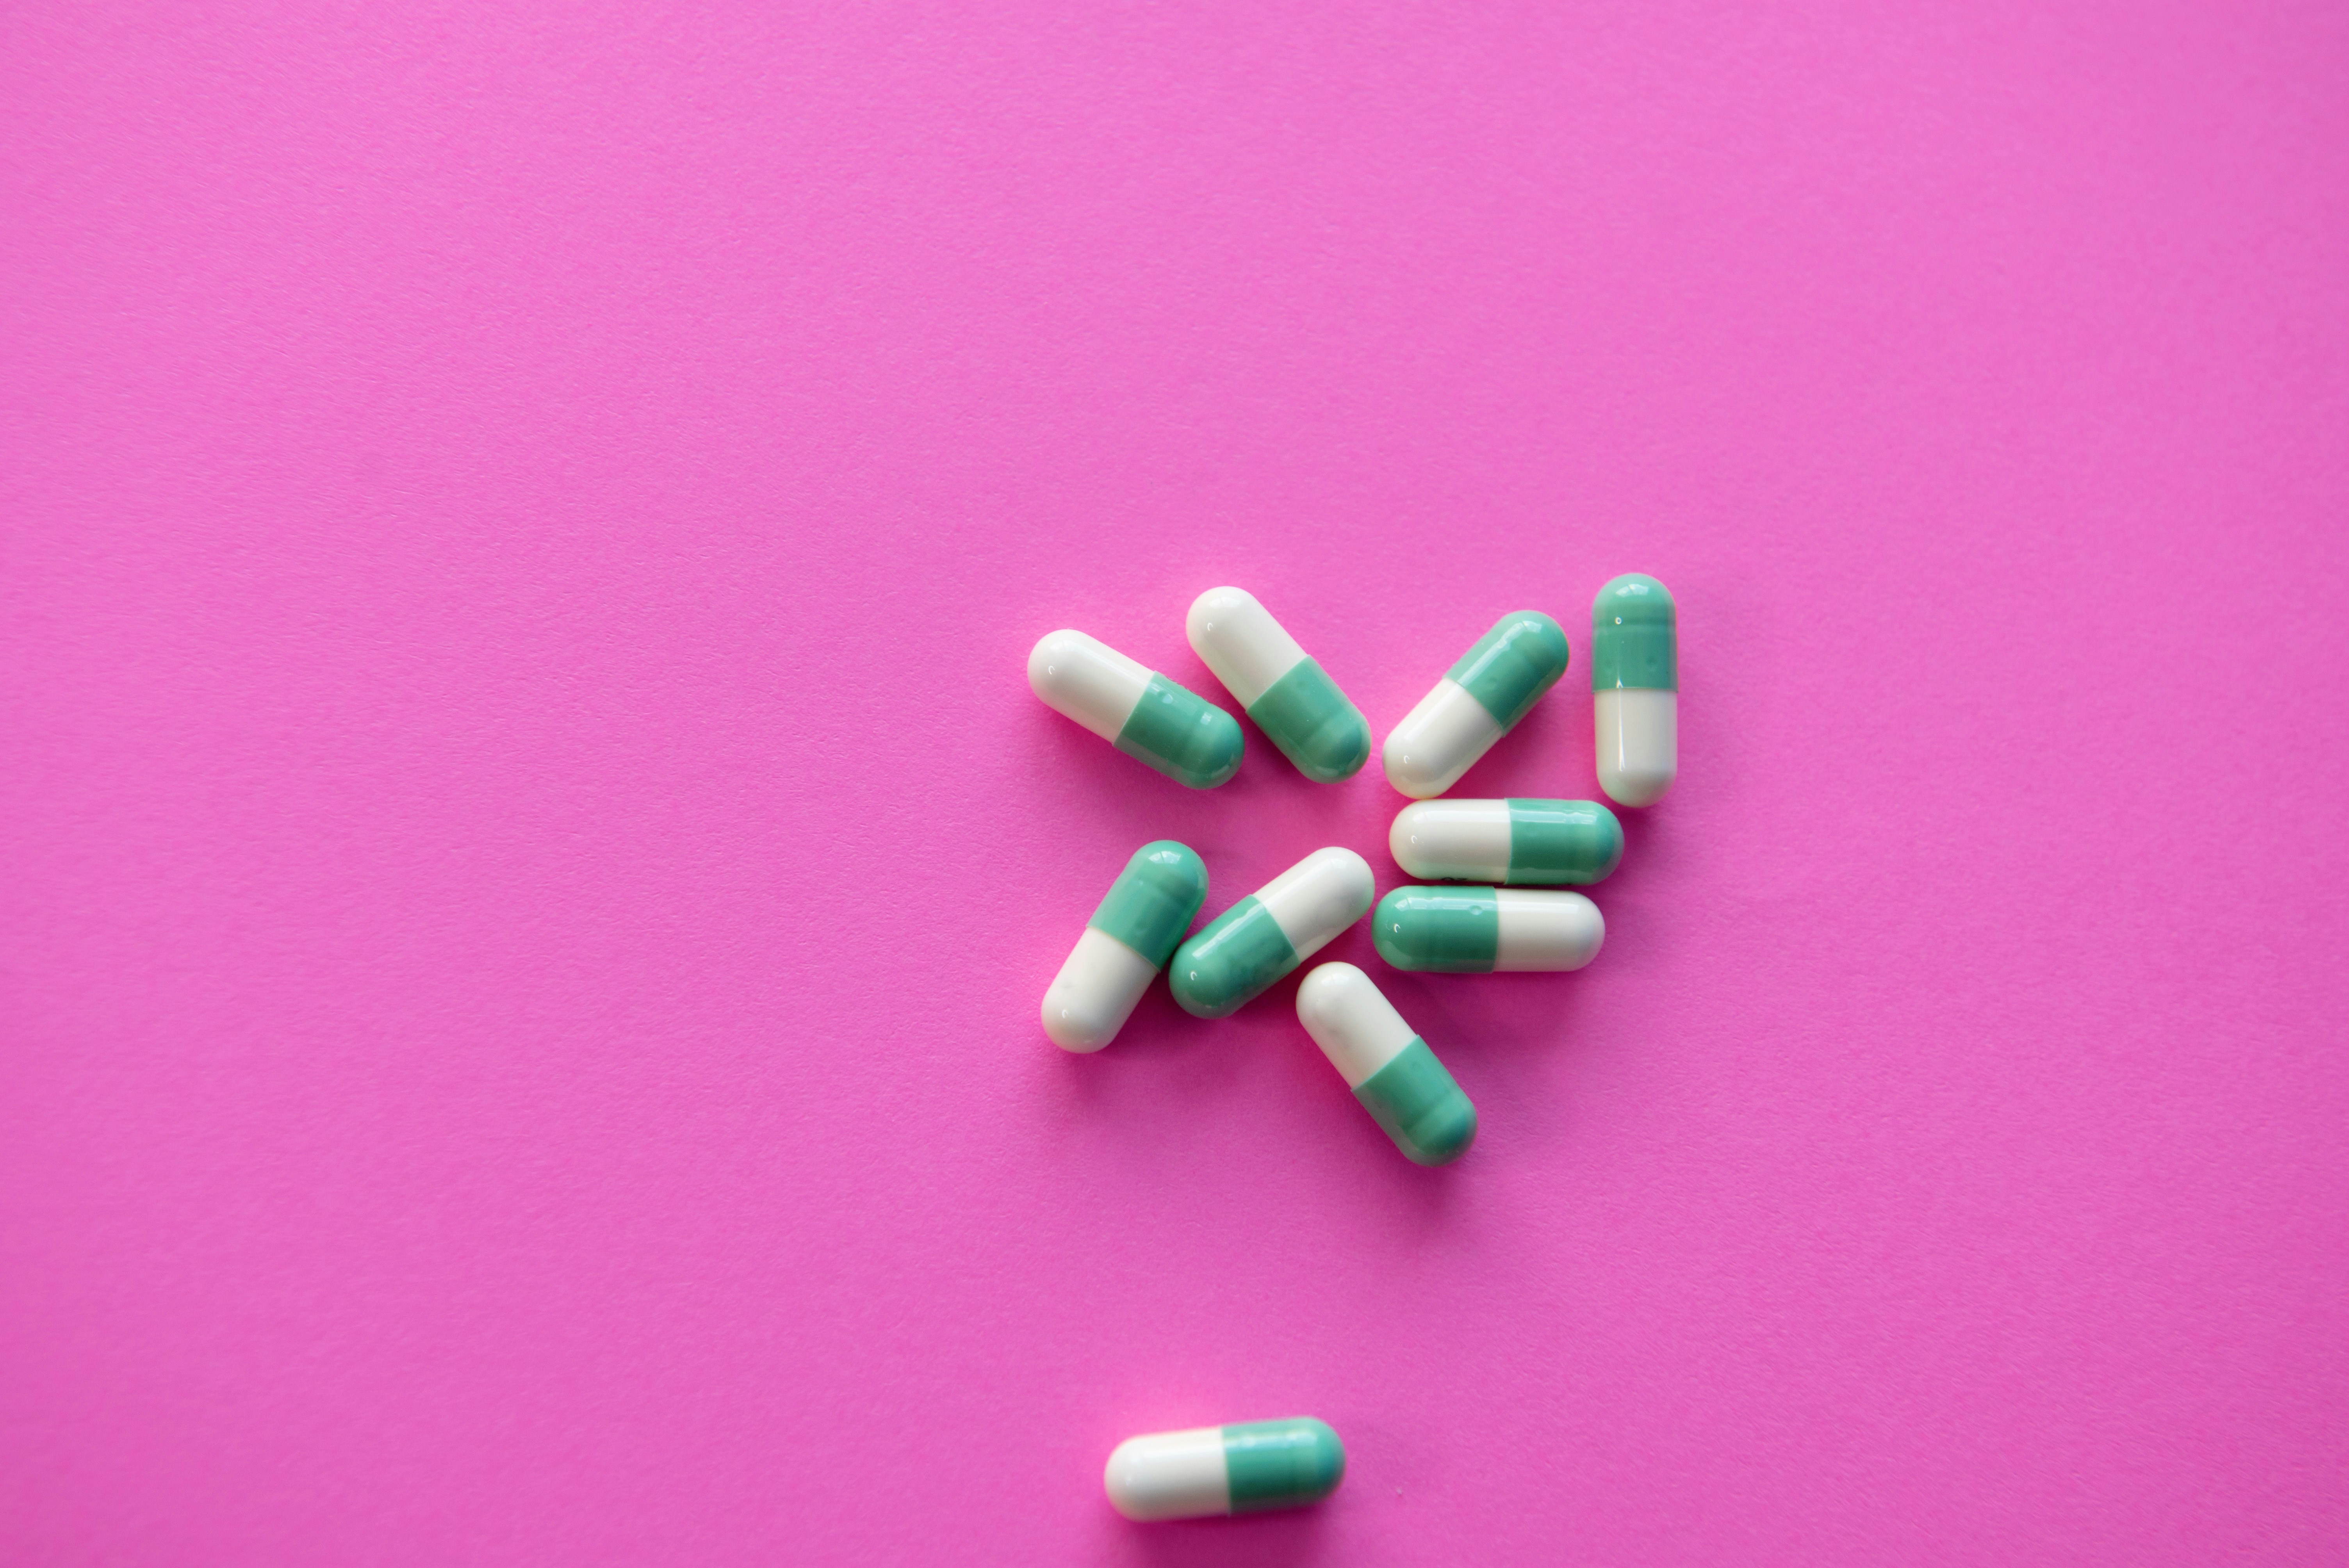 Blue drugs on a pink background - representing the difference of drugs designed for men but given to women. Drug and antidepressant crisis.